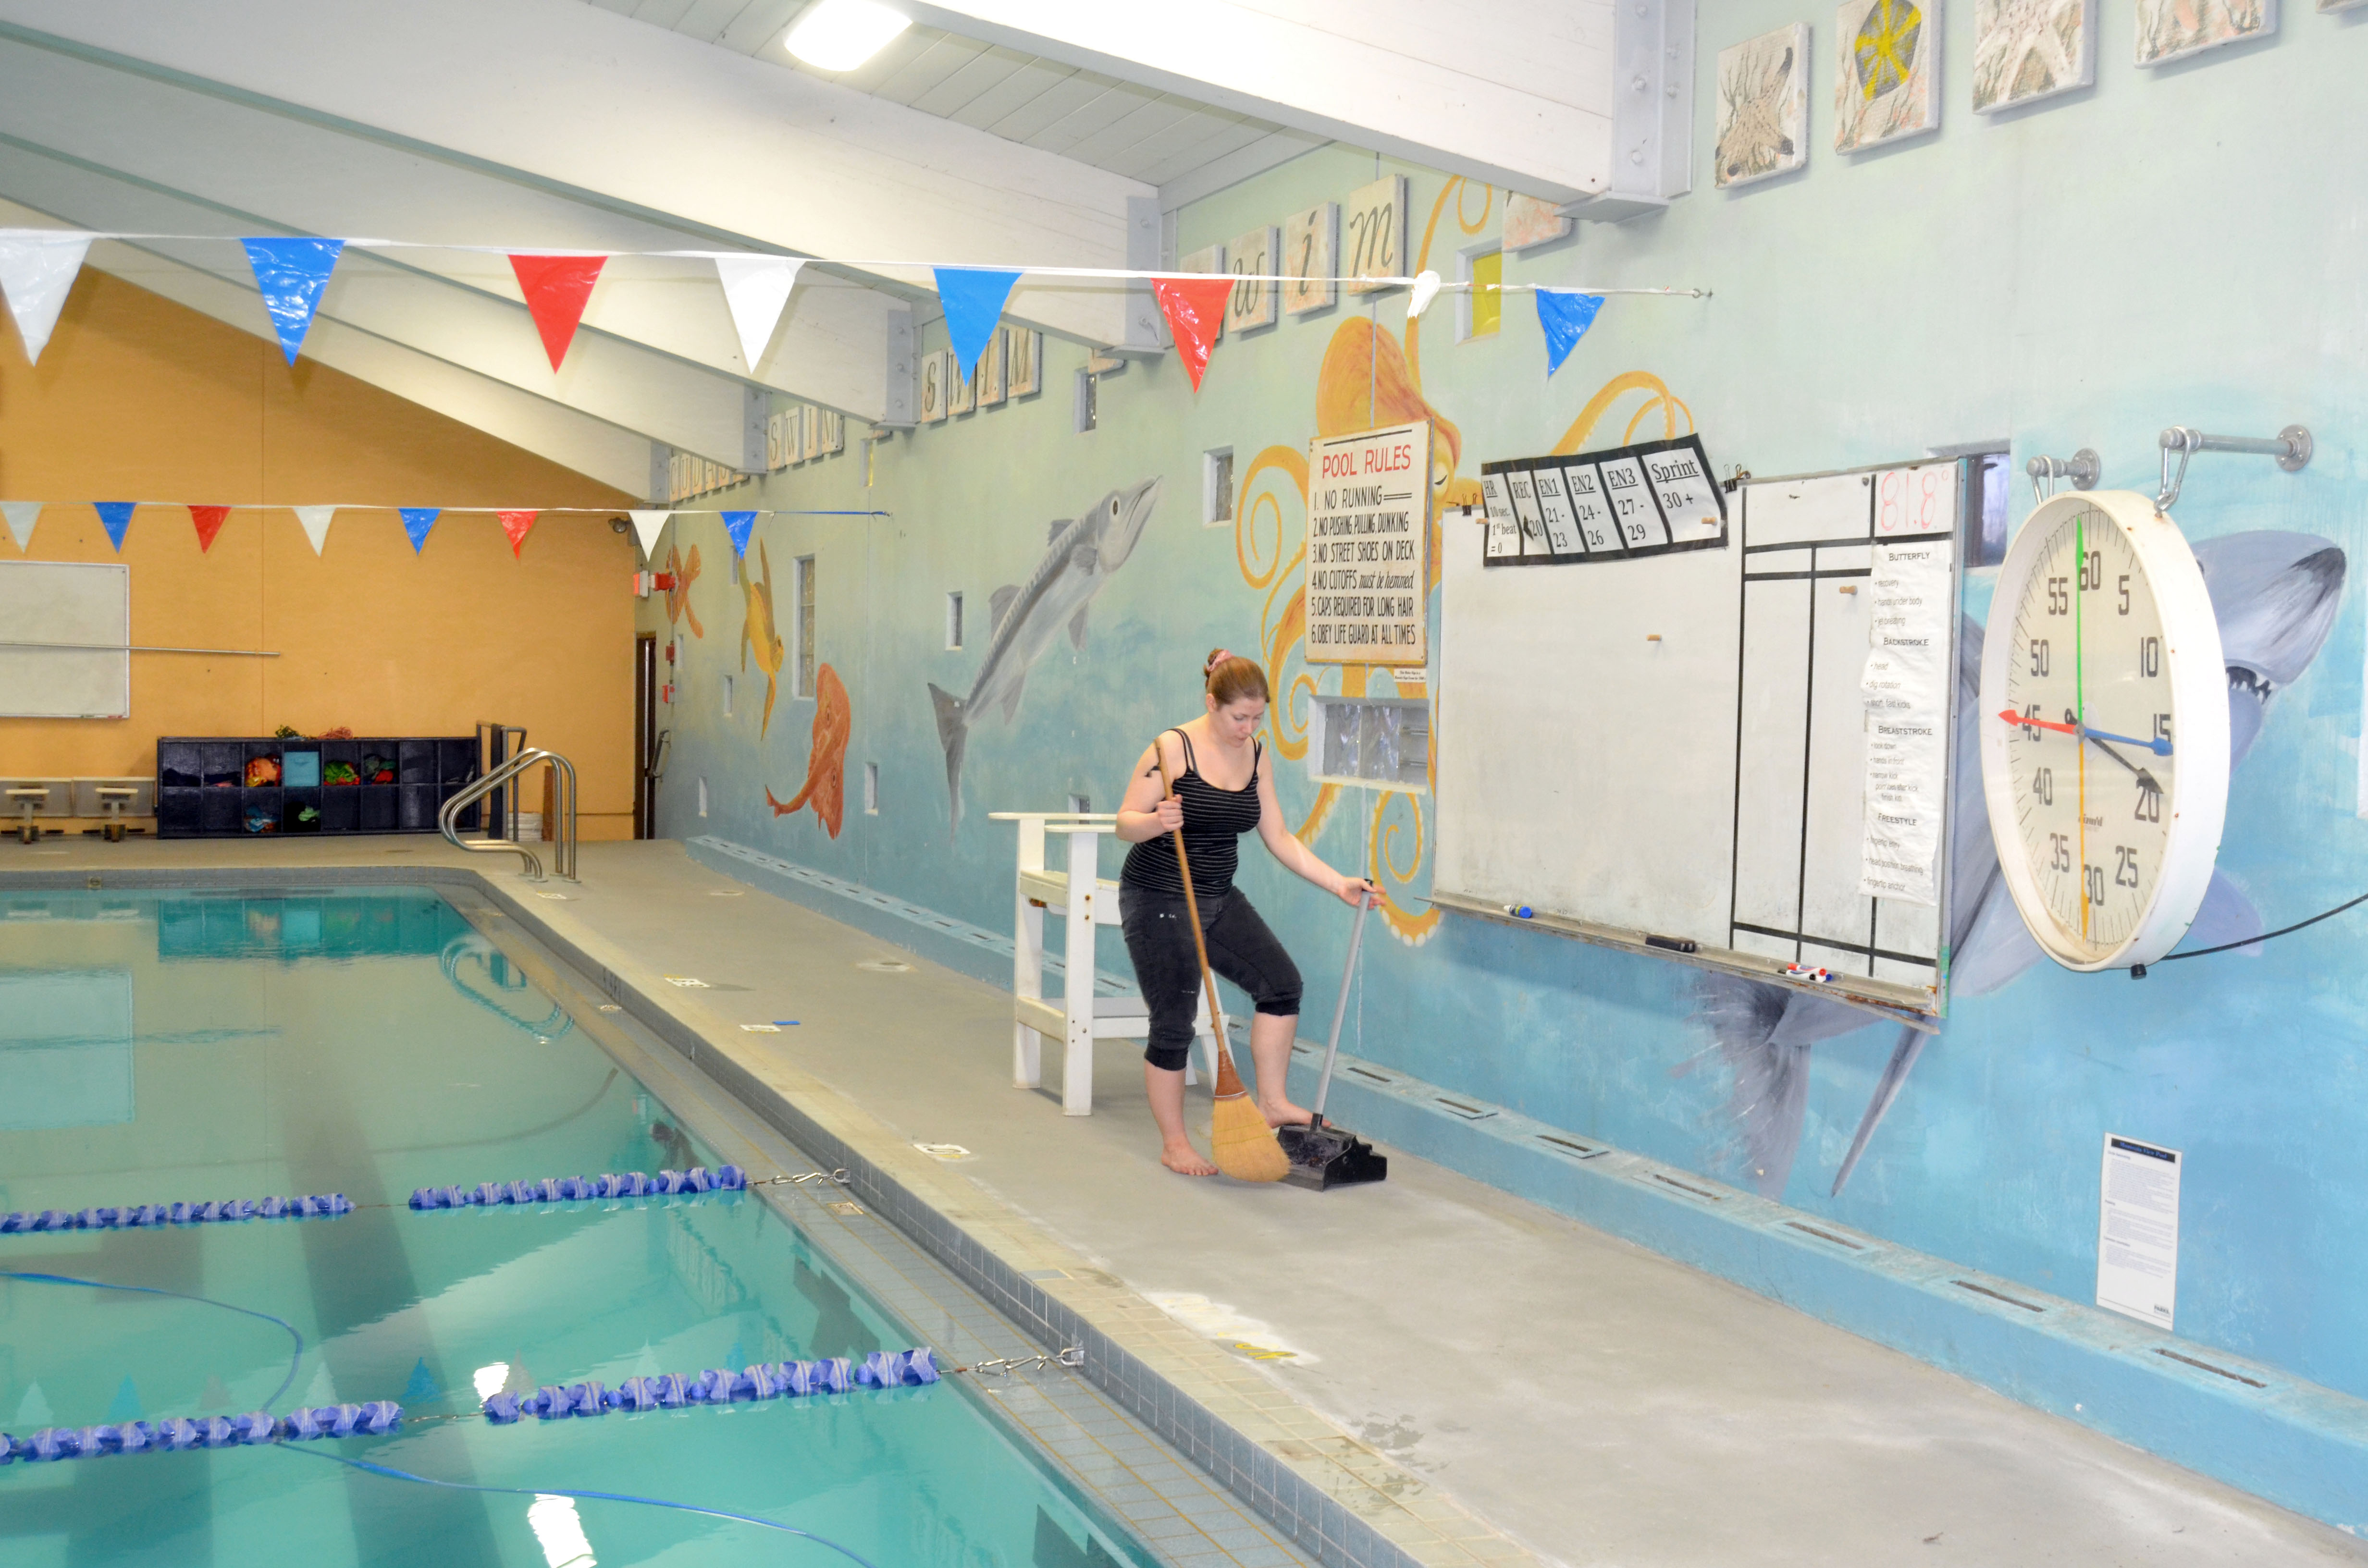 Mountain View Pool employee Sammi Quayle cleans the sides of the pool in preparation for its reopening today. —Photo by Charlie Bermant/Peninsula Daily News ()